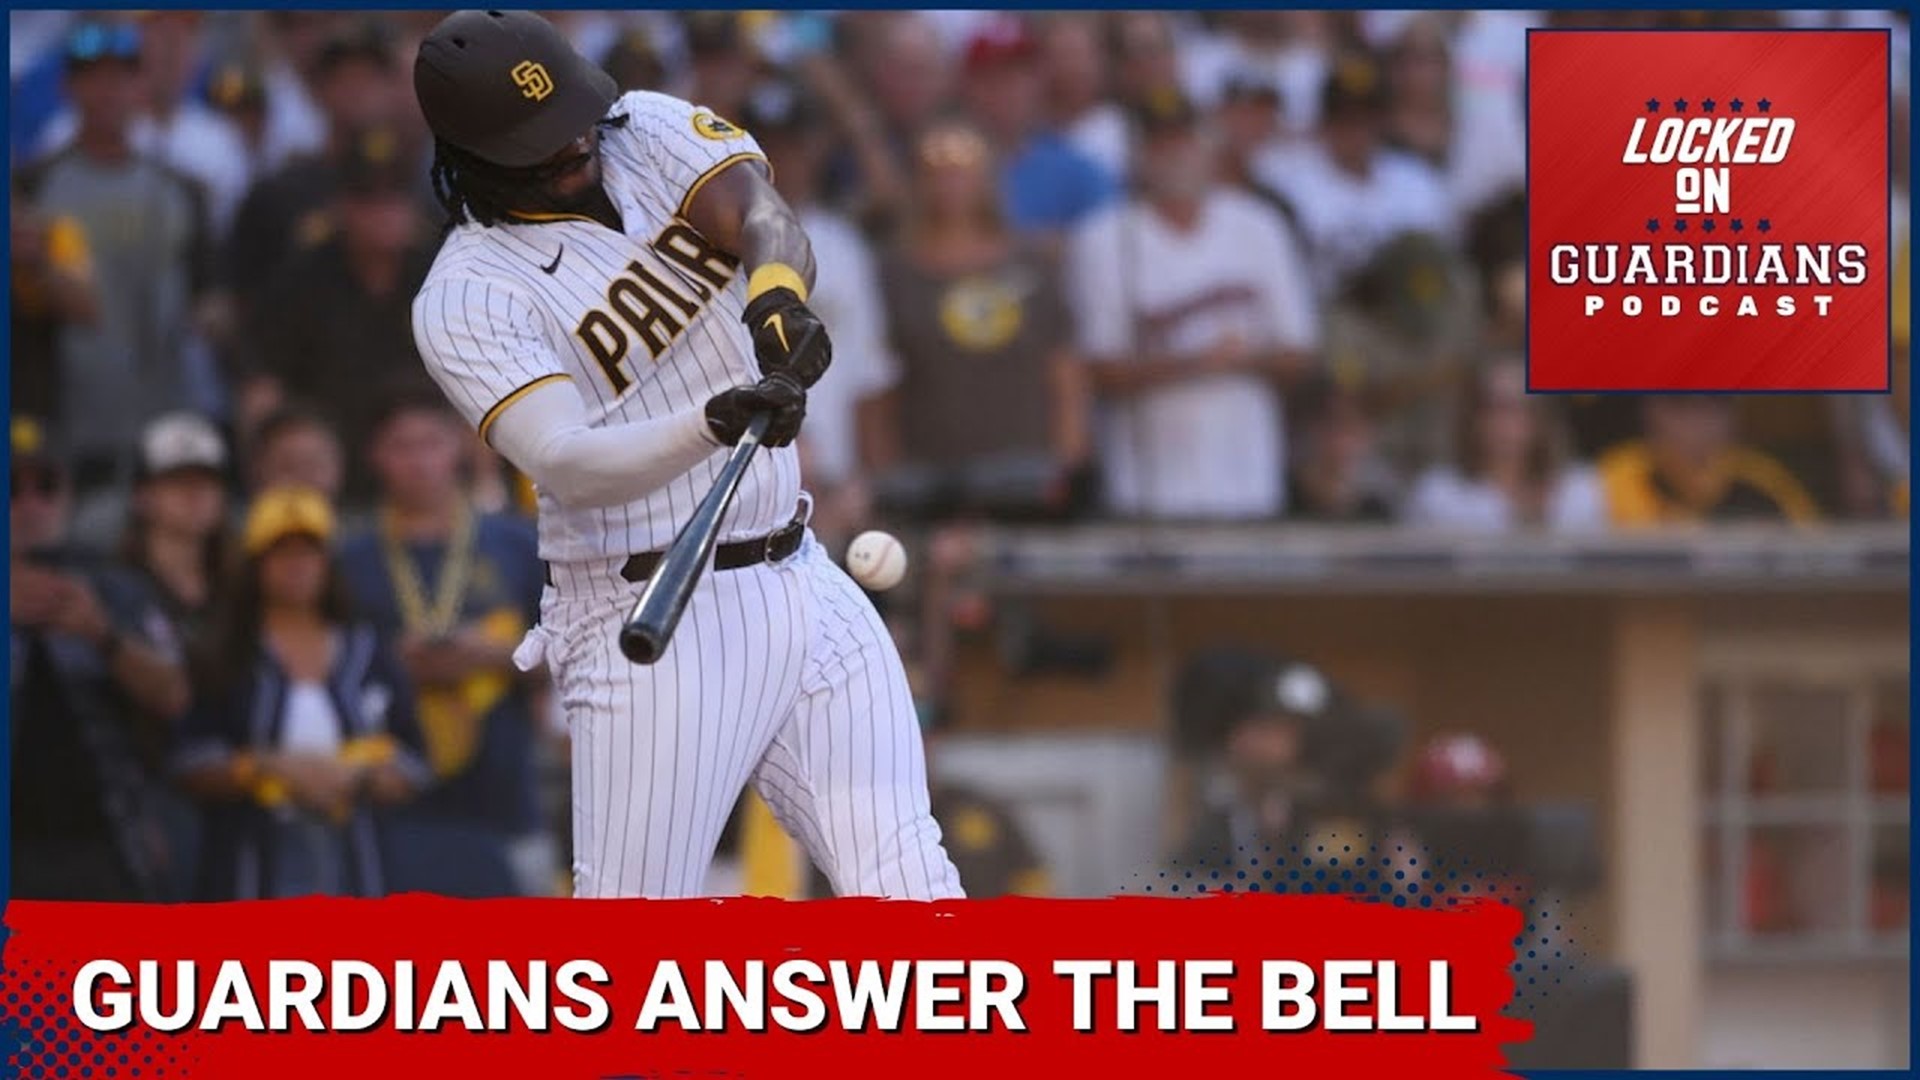 Cleveland Guardians sign Josh Bell: Locked On Guardians